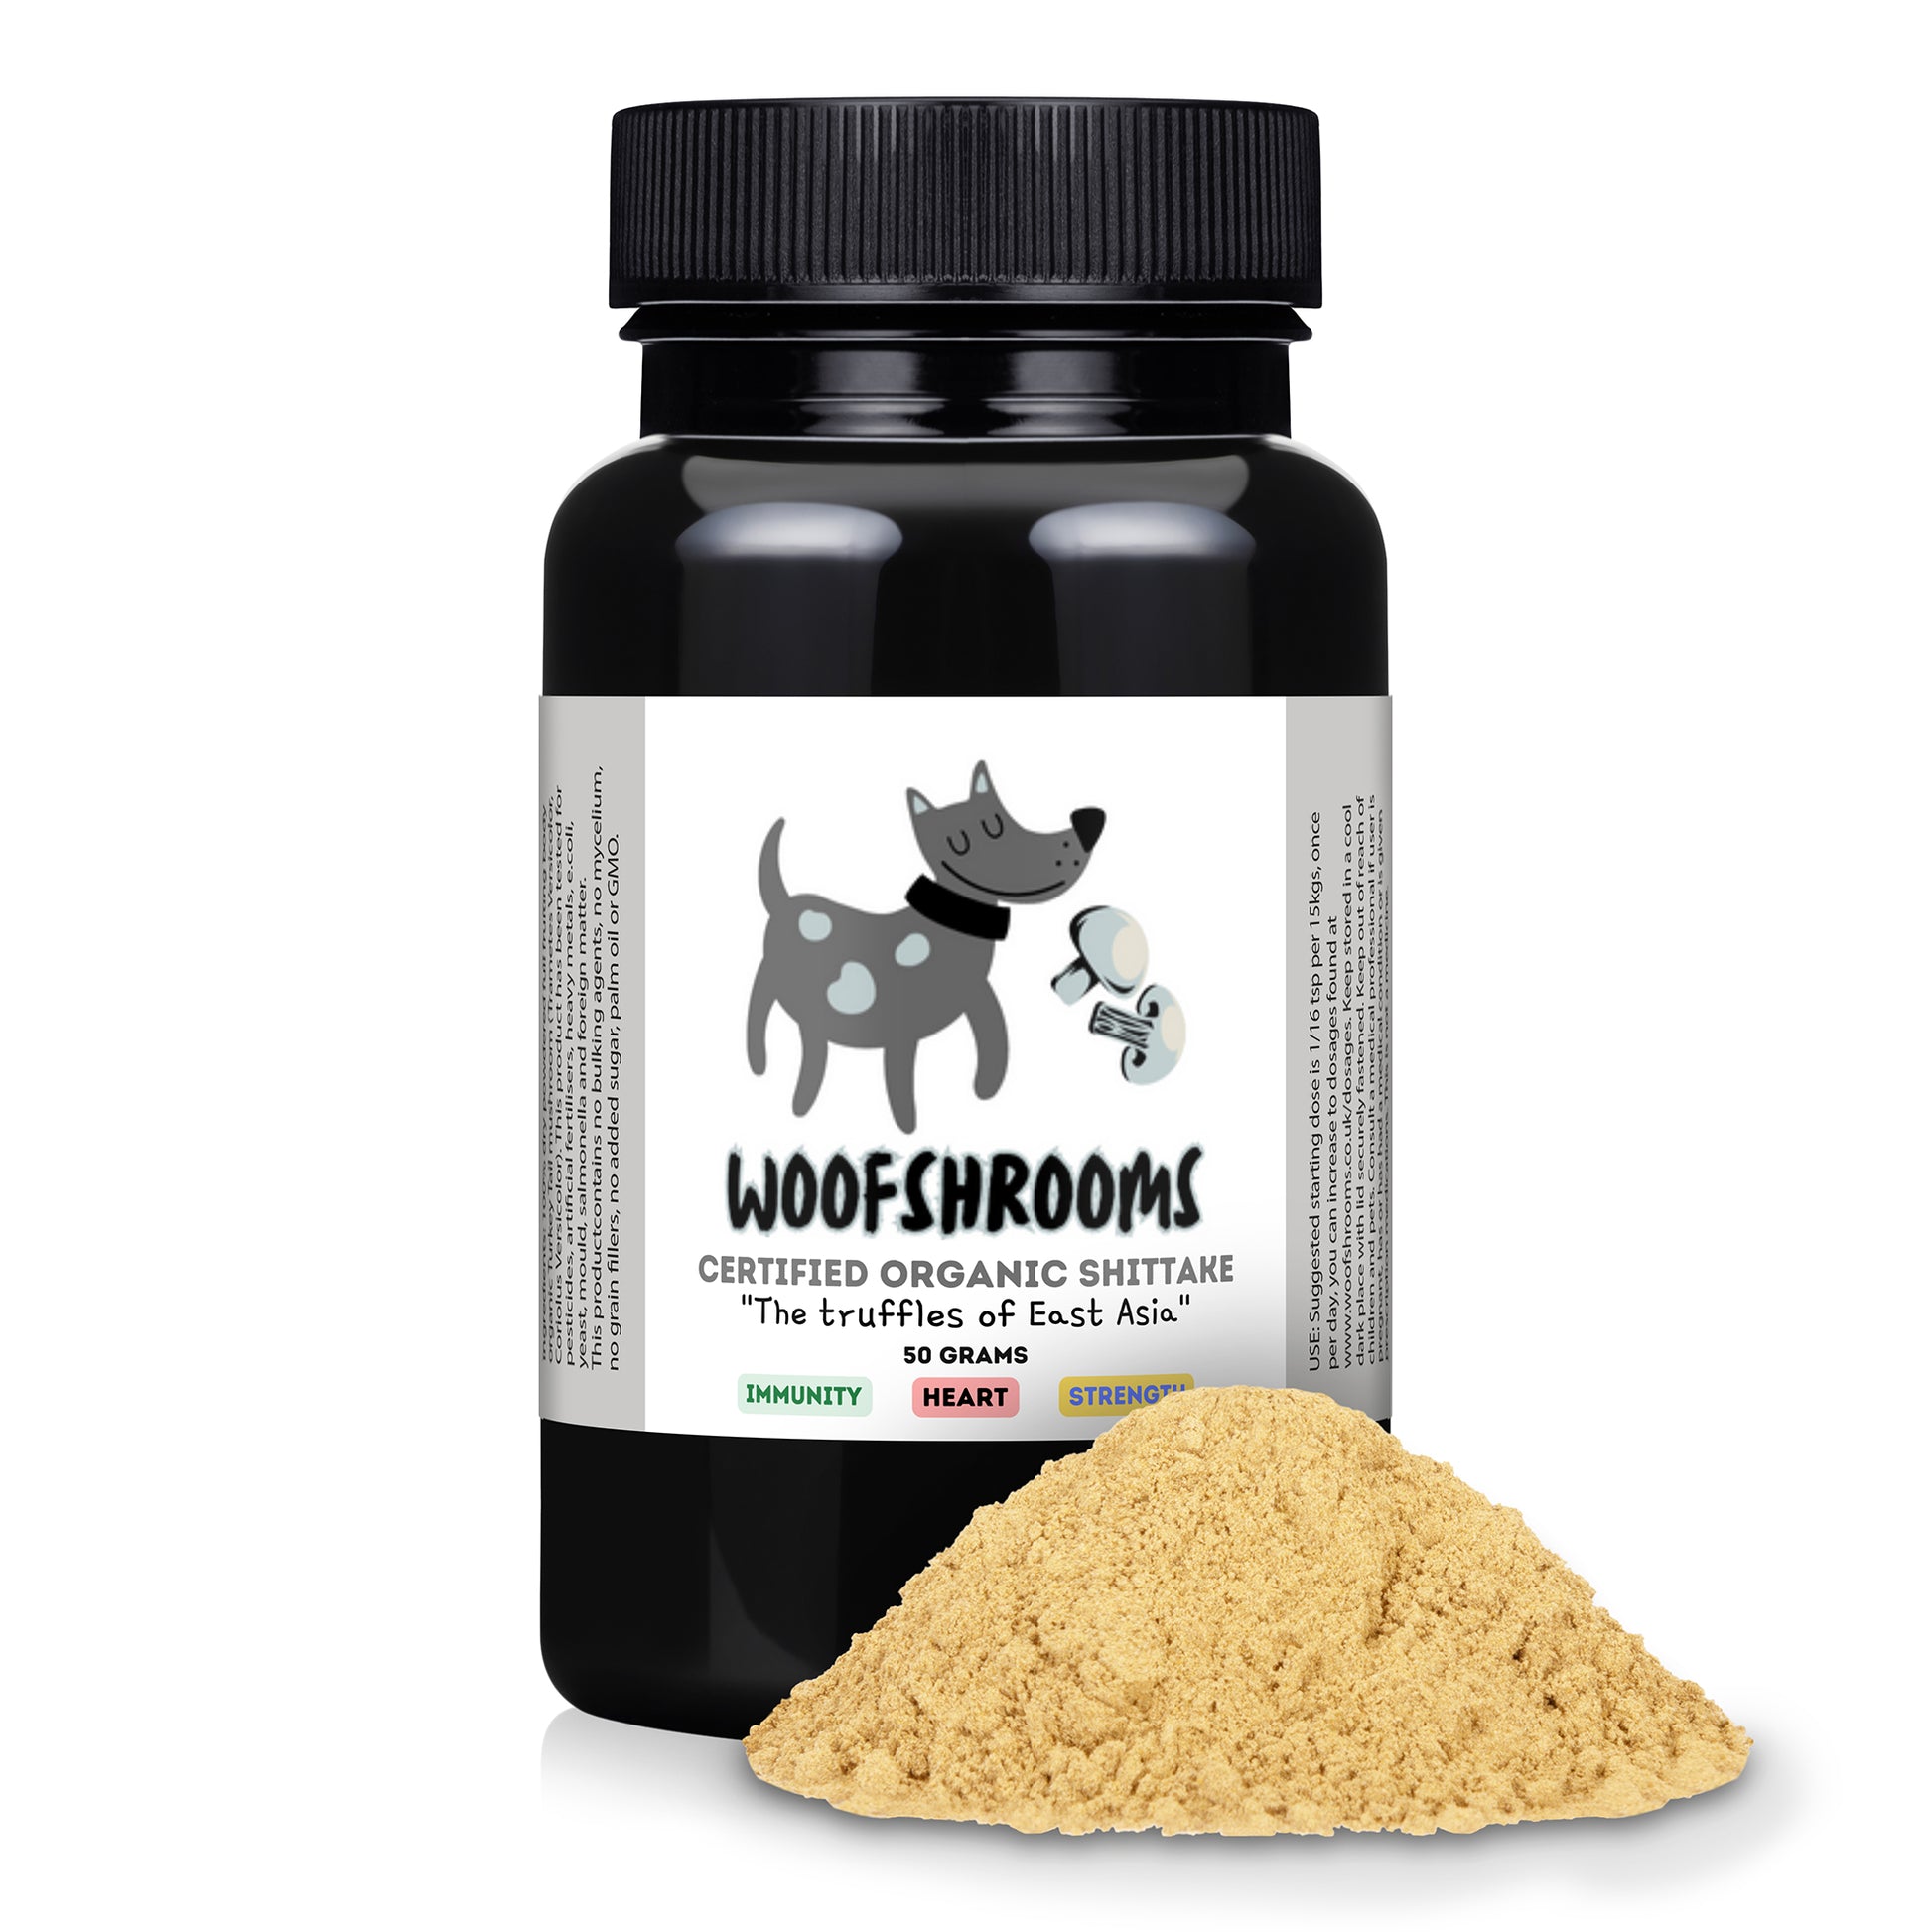 Organic Shiitake mushroom supplement with vitamin d for dogs.